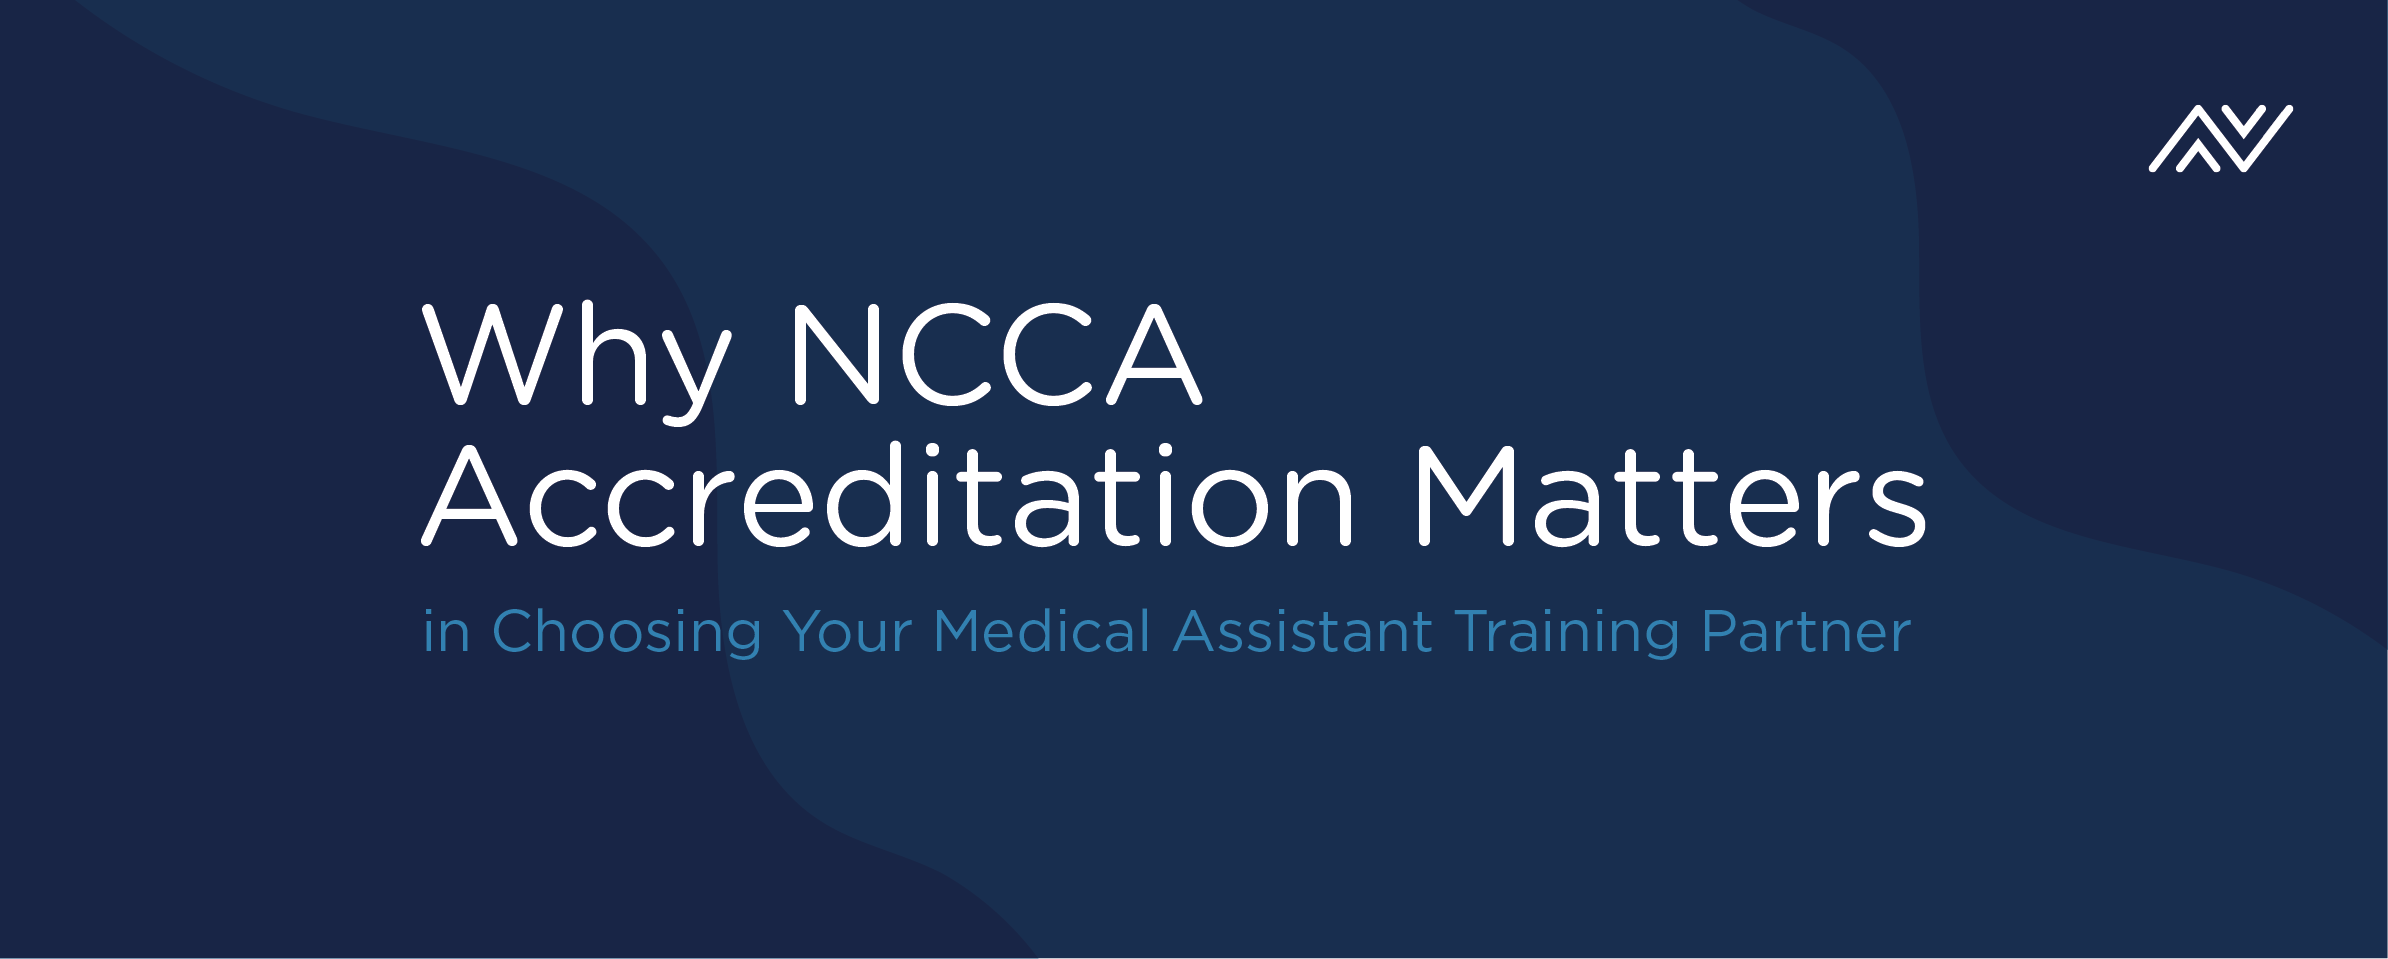 Why NCCA Accreditation Matters in Choosing Your Medical Assistant Training Partner